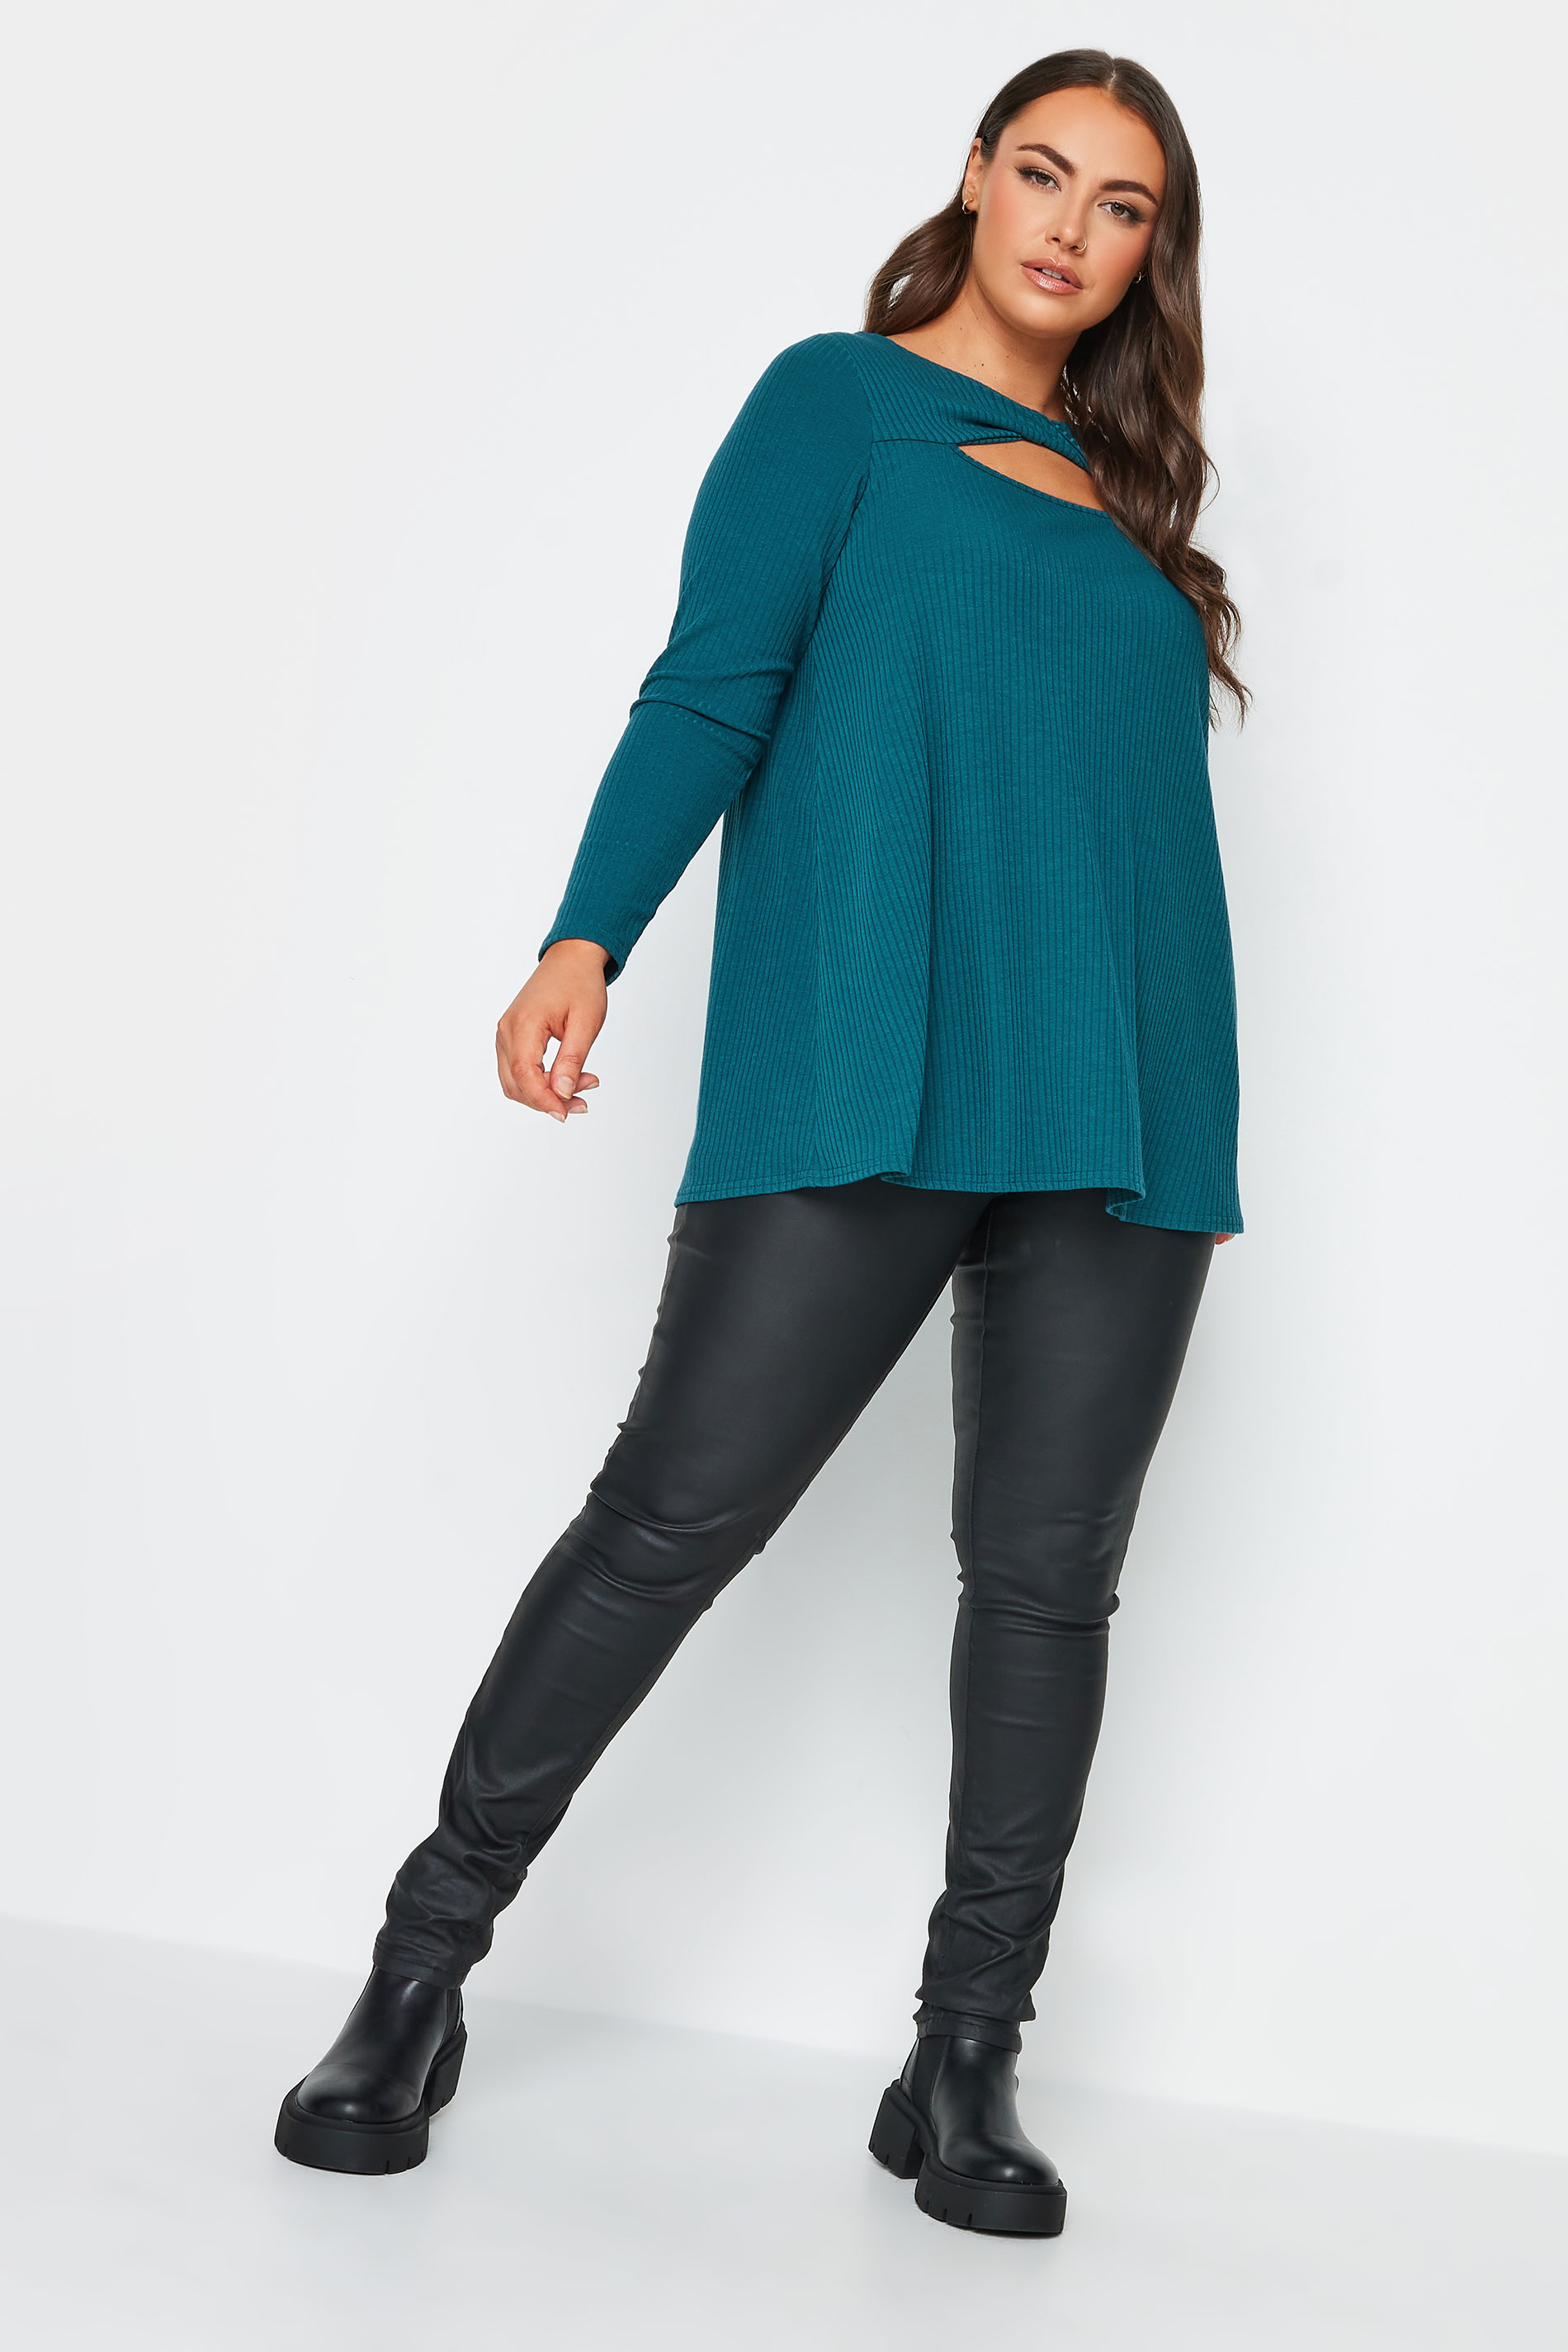 YOURS Plus Size Teal Blue Twisted Front Ribbed Top | Yours Clothing 2